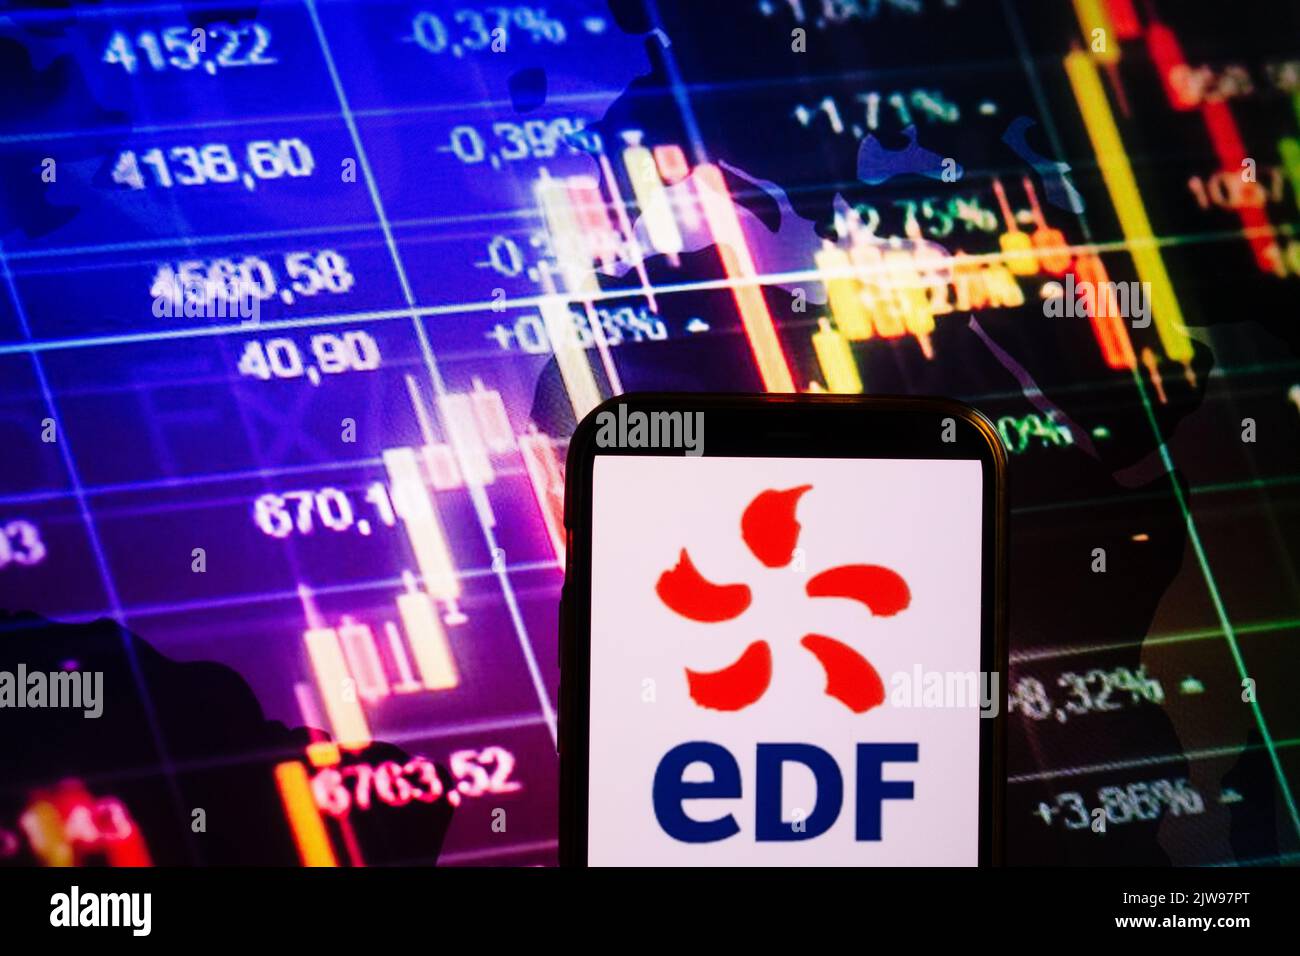 KONSKIE, POLAND - August 30, 2022: Smartphone displaying logo of EDF (Electricite de France) company on stock exchange diagram background Stock Photo